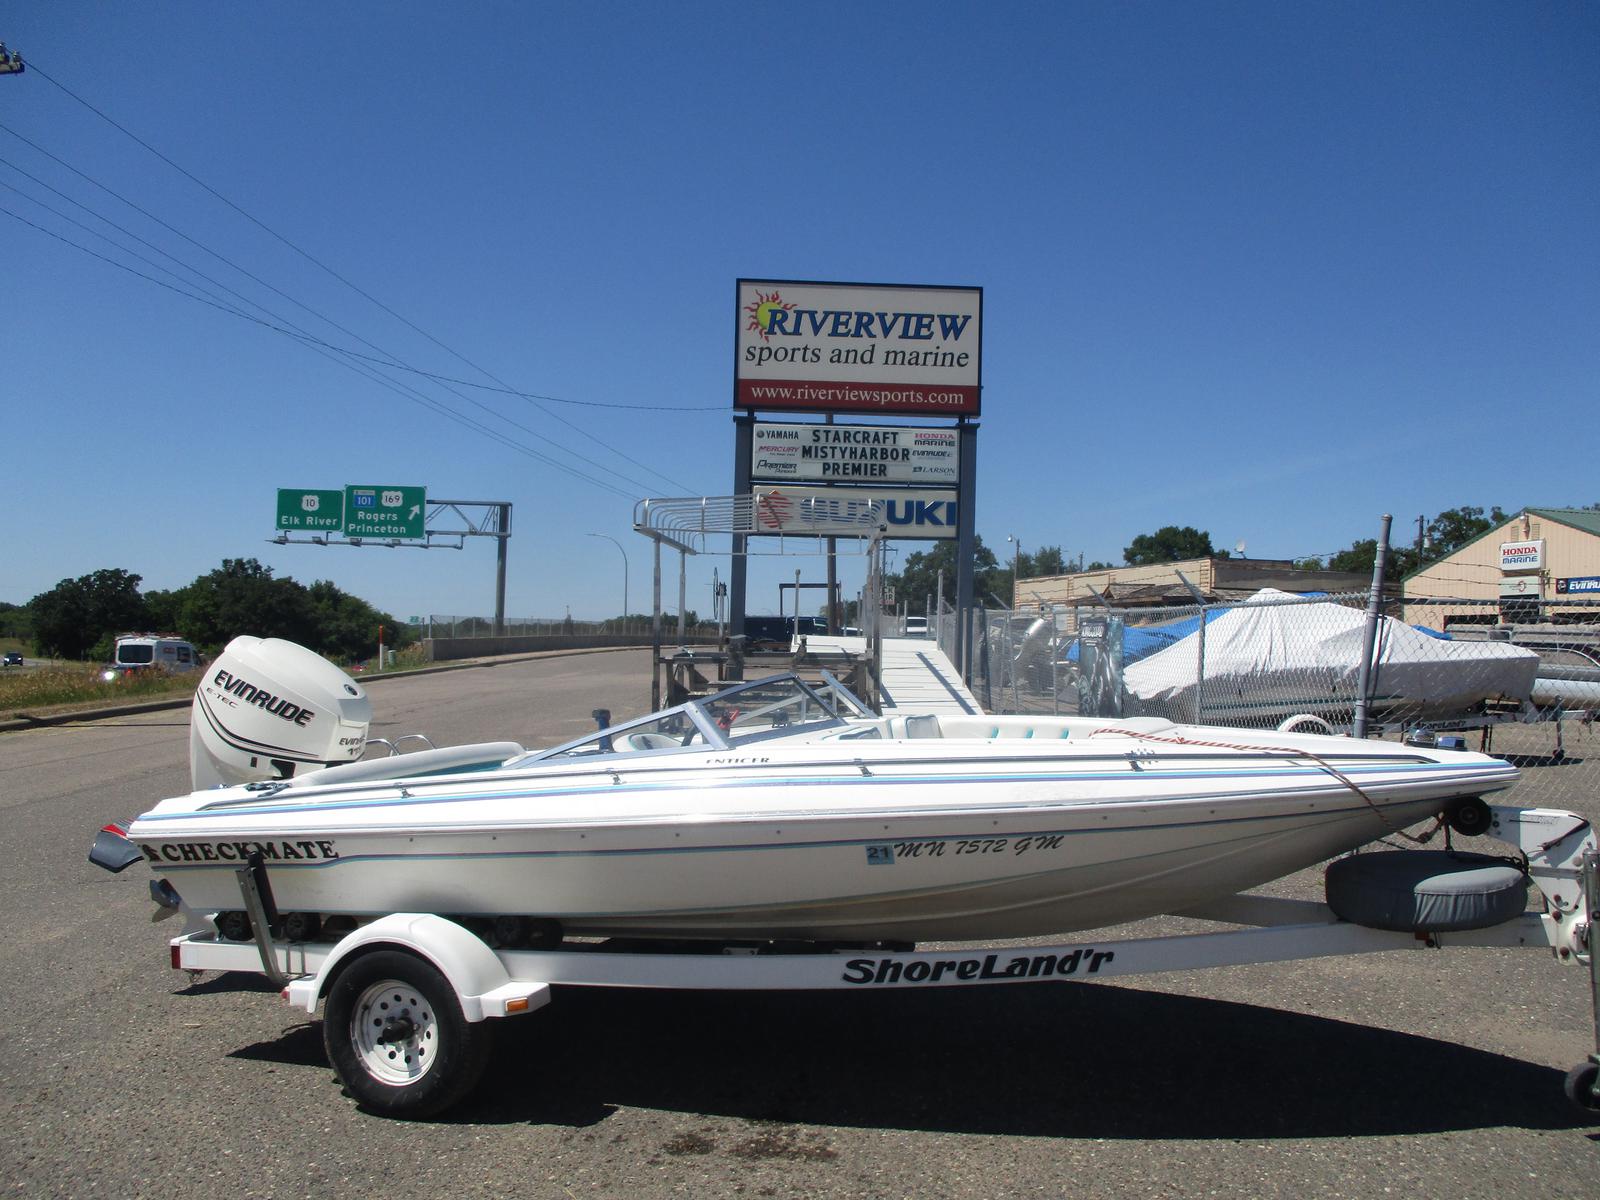 1994 CHECKMATE BOATS INC 161 Fishing Machine With A 50HP Evinrude Motor